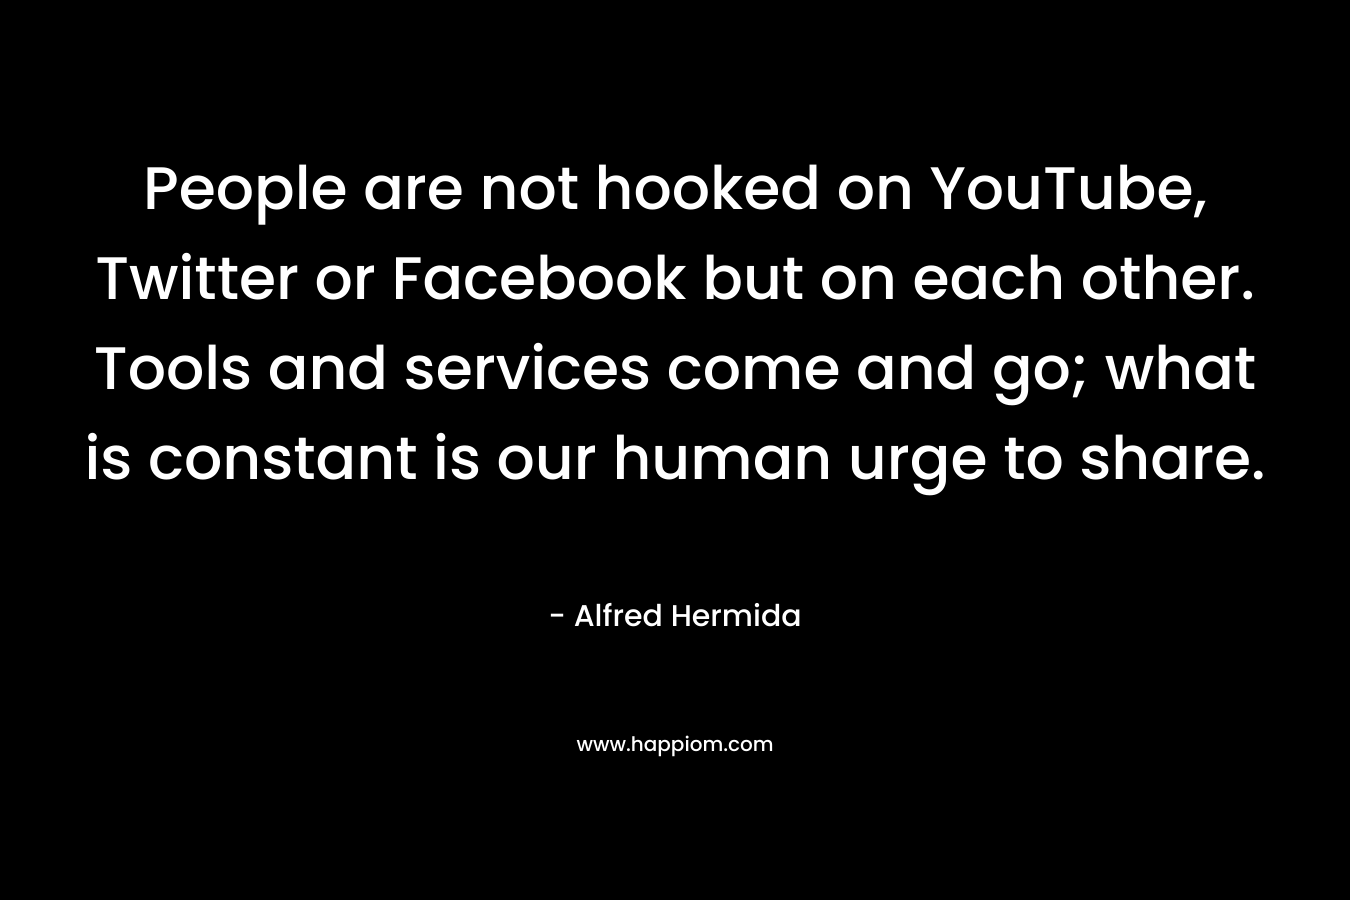 People are not hooked on YouTube, Twitter or Facebook but on each other. Tools and services come and go; what is constant is our human urge to share. – Alfred Hermida